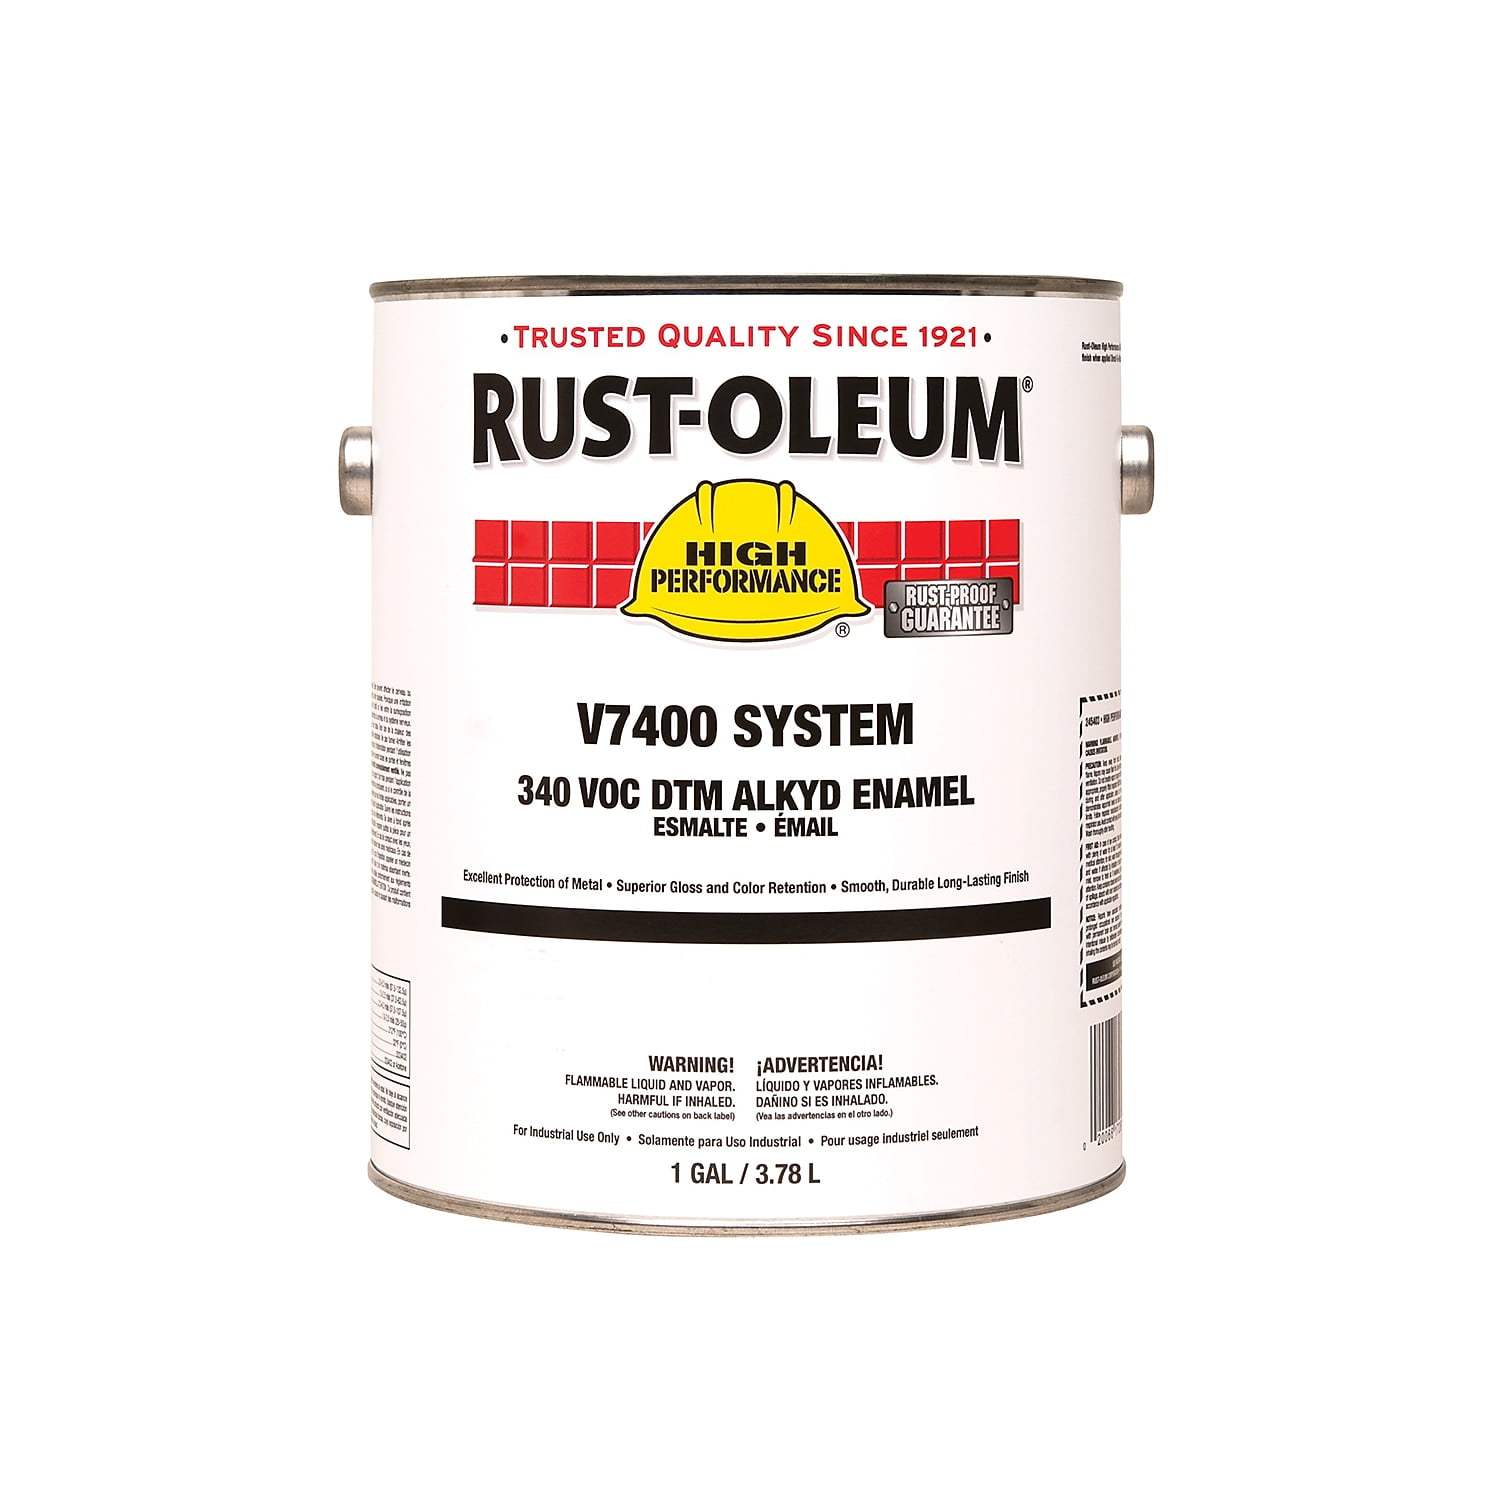 The Longest Lasting Paint For Rusted Metal - Industrial Grade Protection